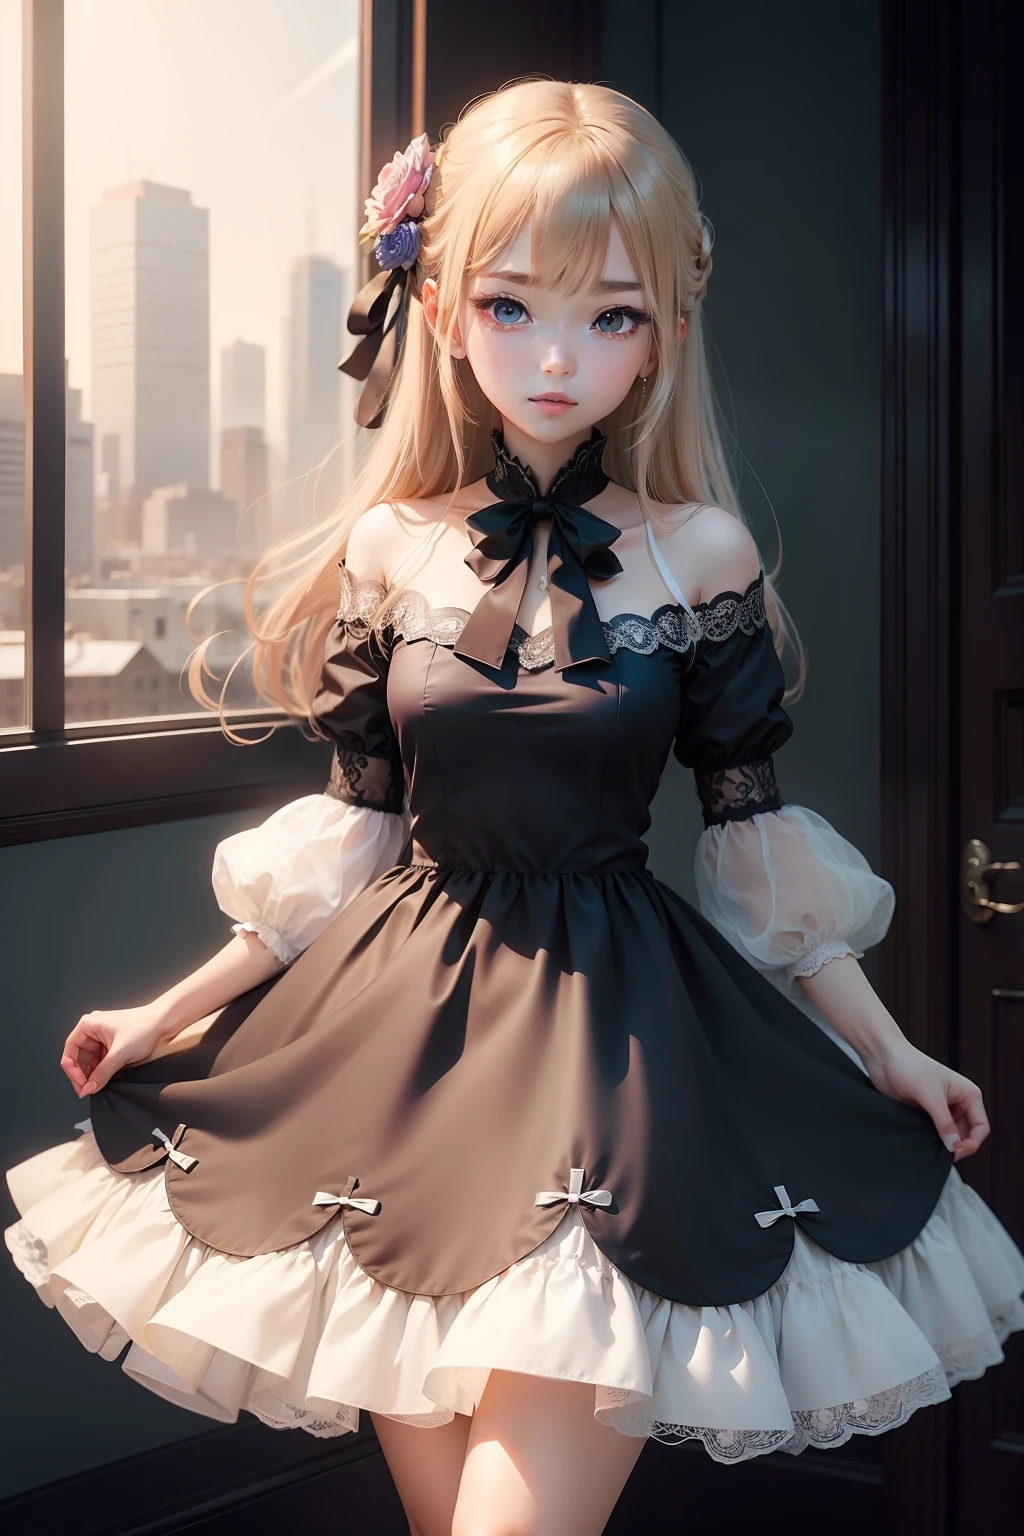 Anime girl wearing elegant dress，The image quality is clear and superb。